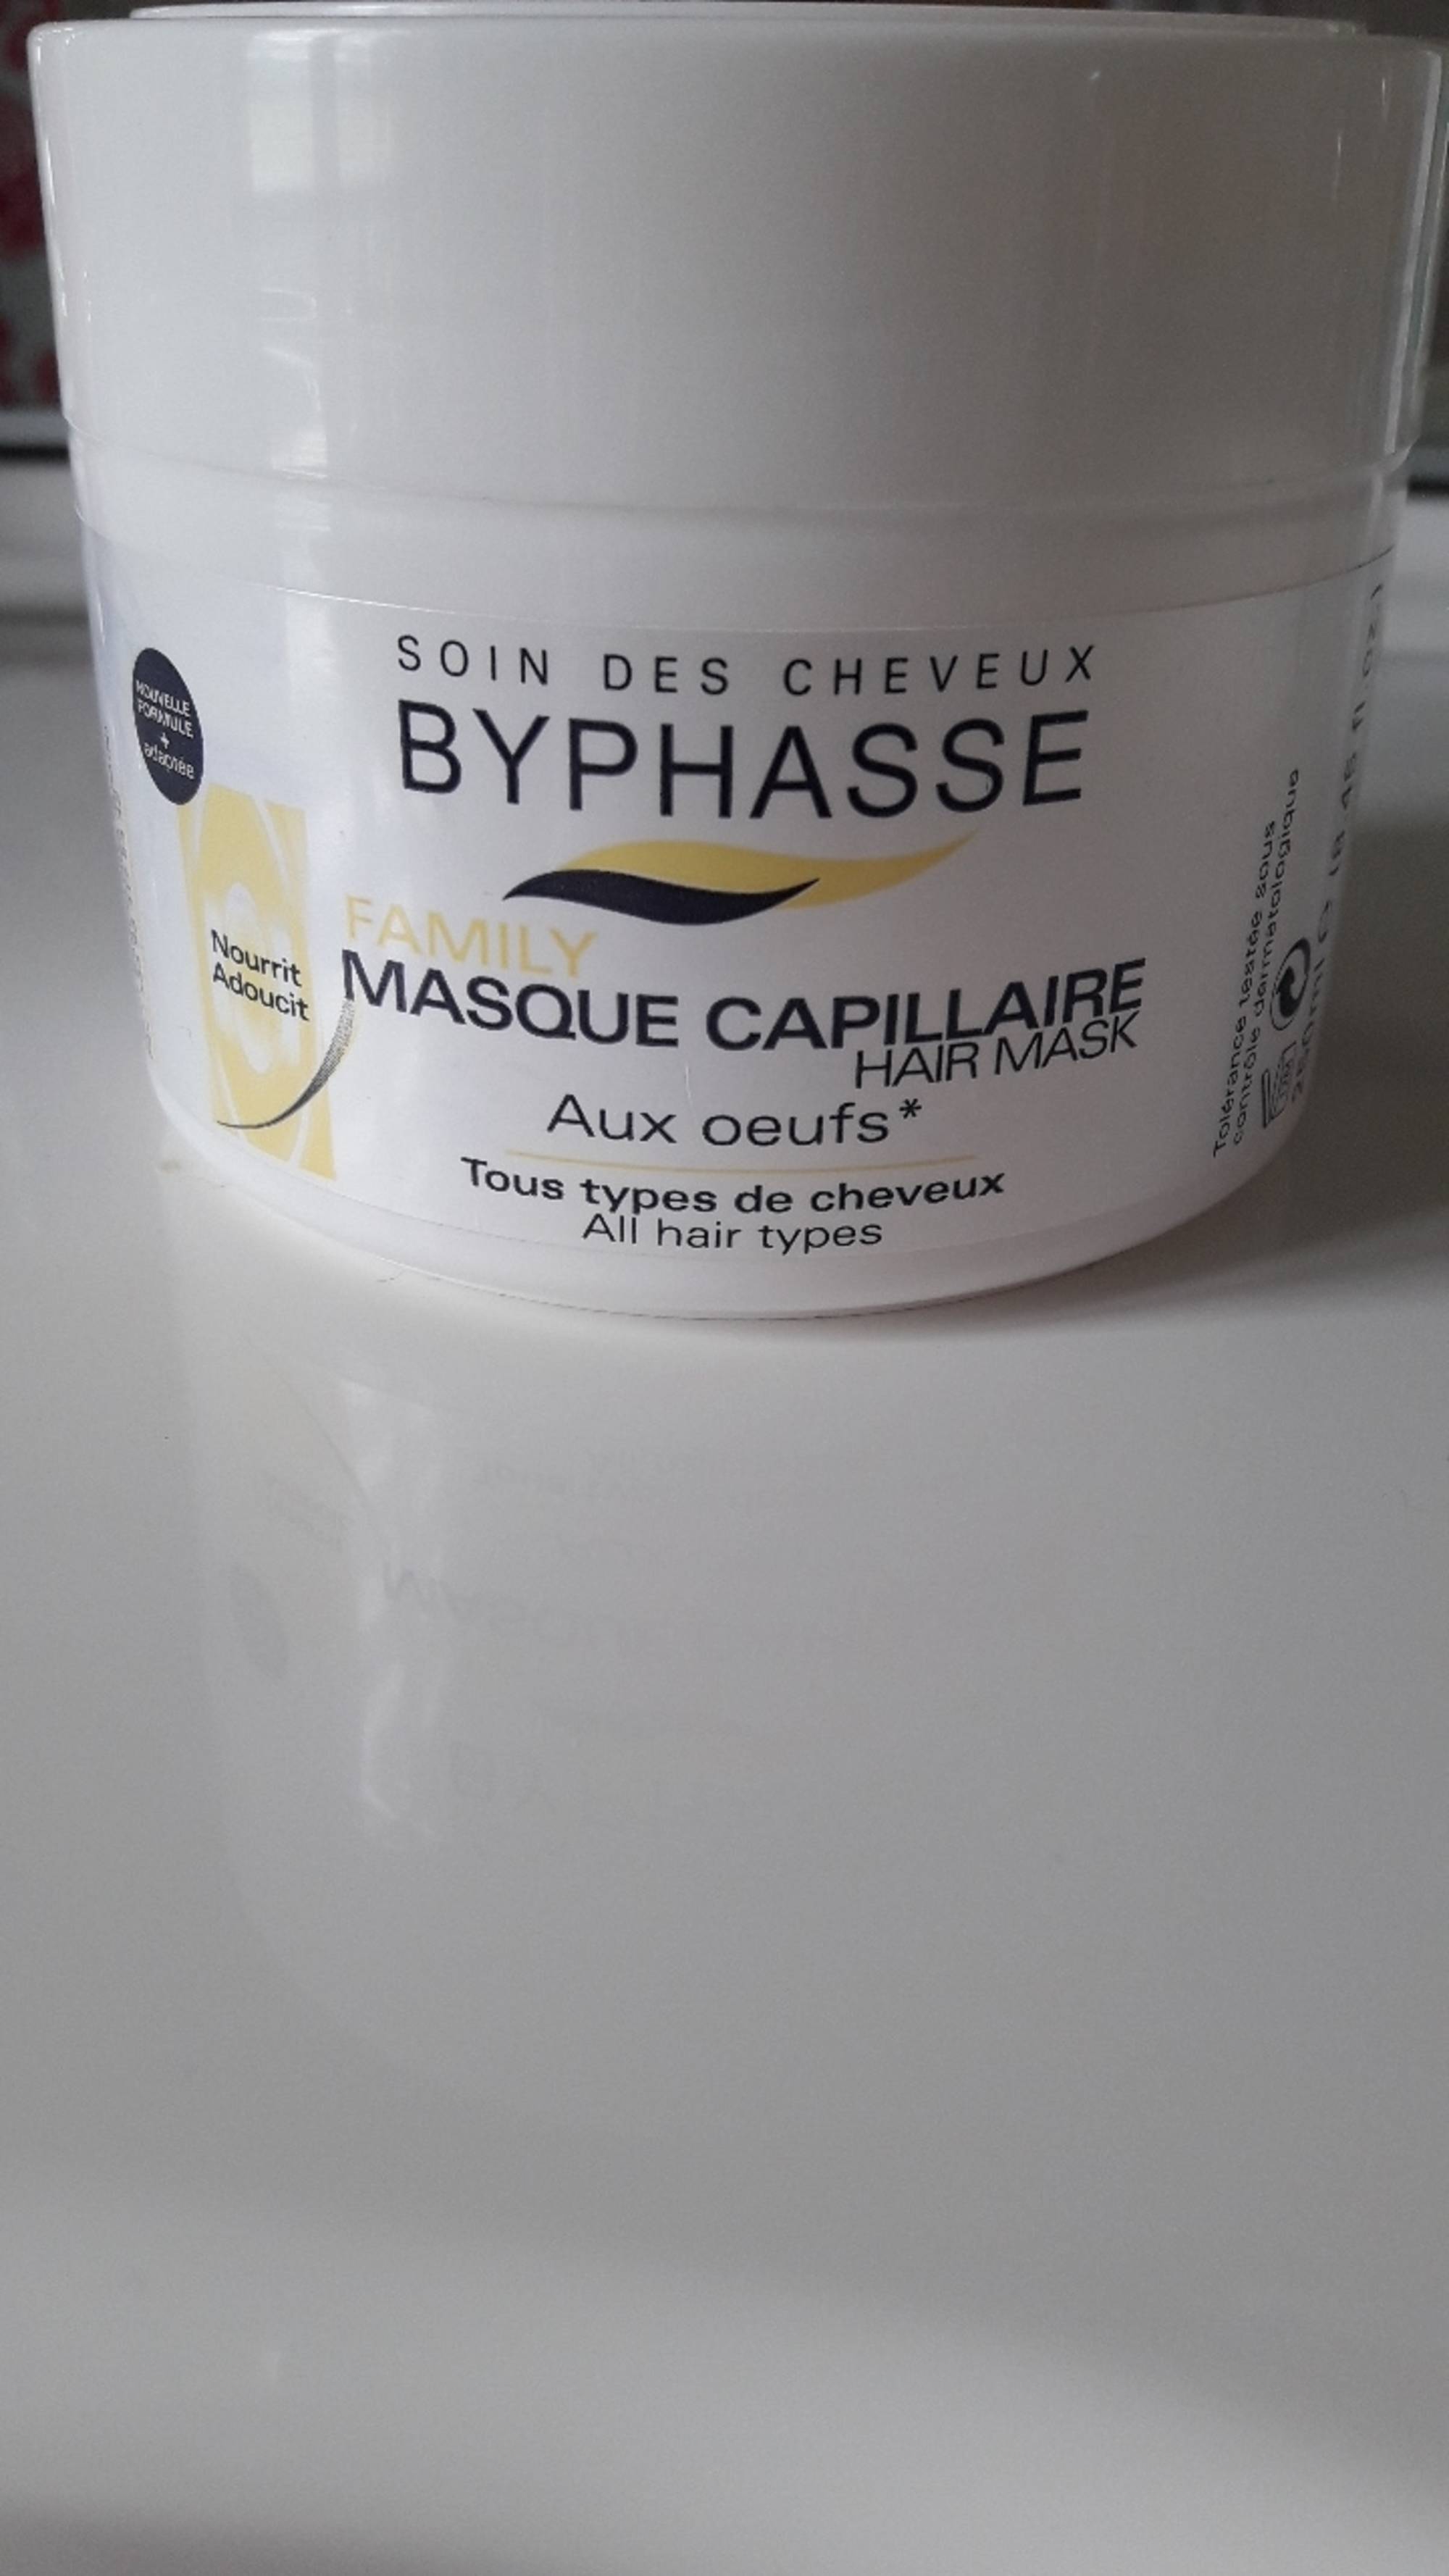 BYPHASSE - Family - Masque capillaire aux oeufs